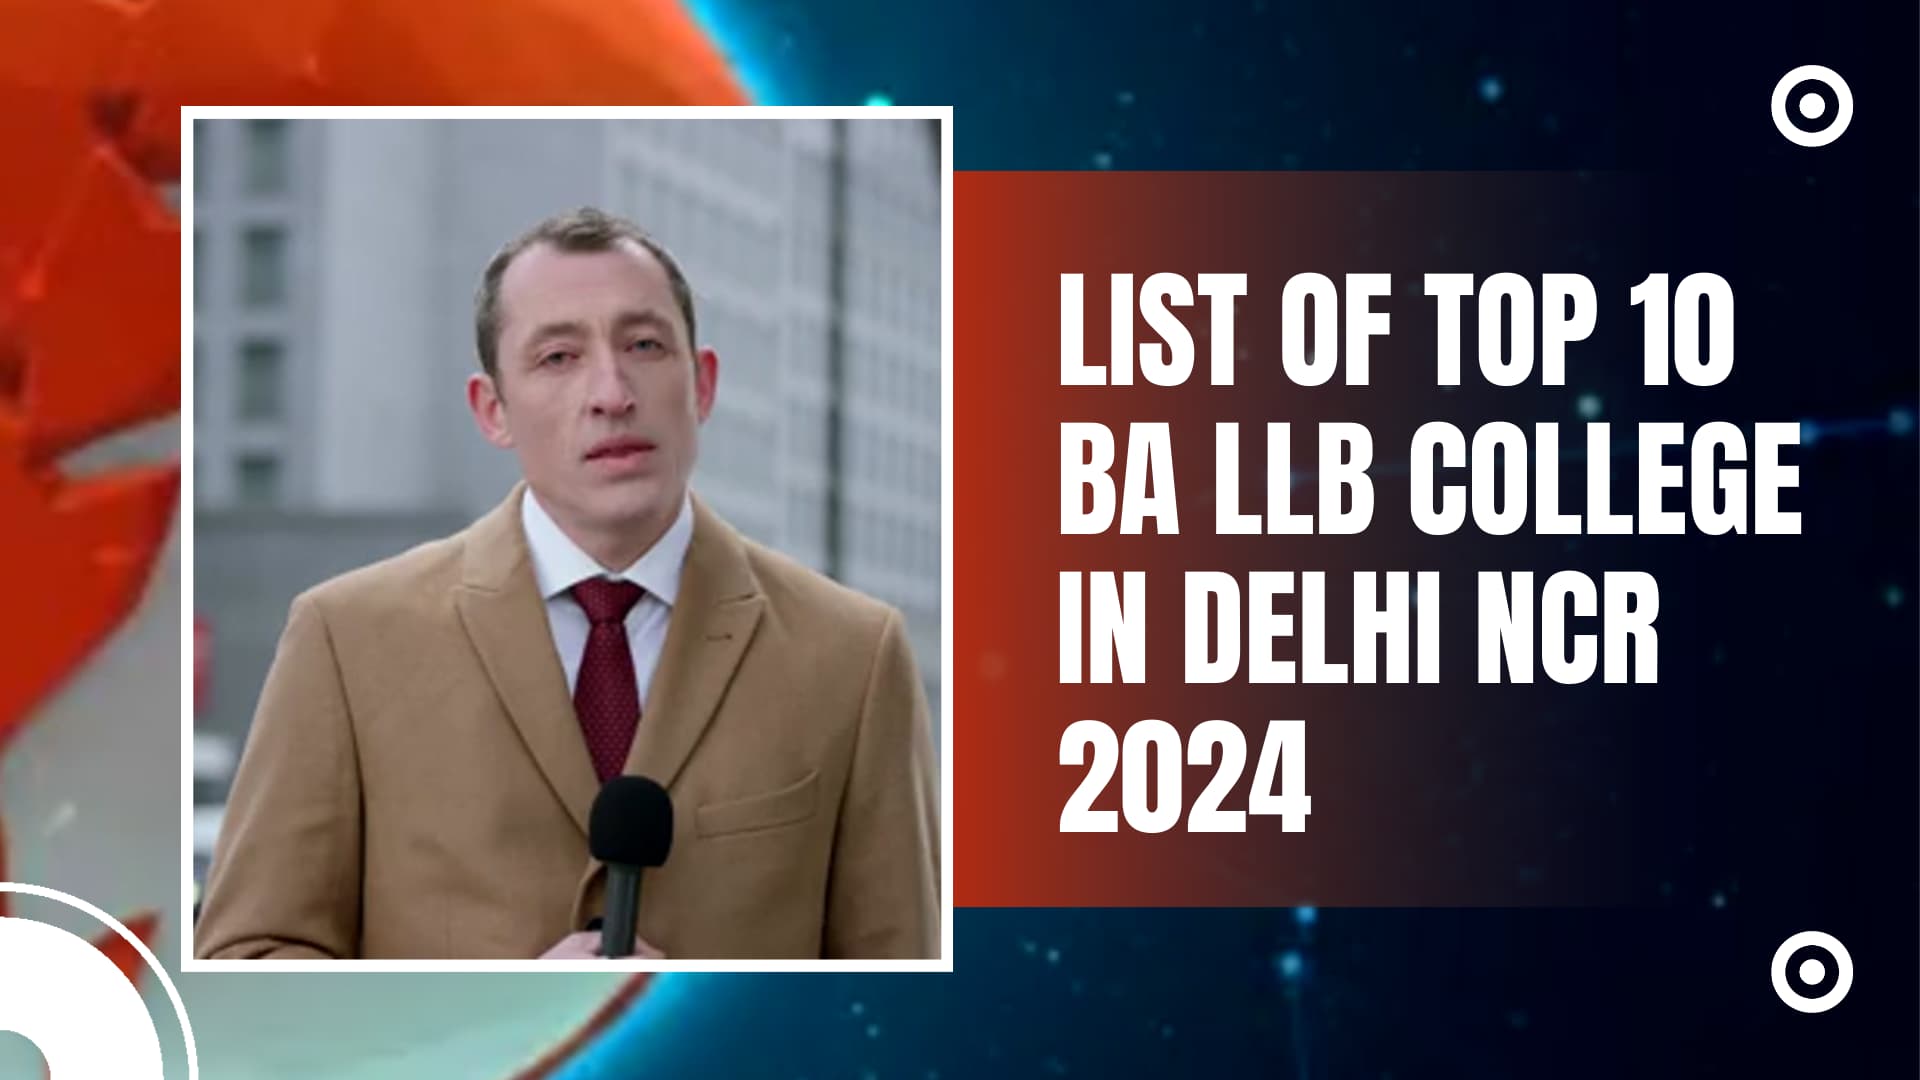 Exclusive List of Top 10 BA LLB Colleges in Delhi NCR, 2024